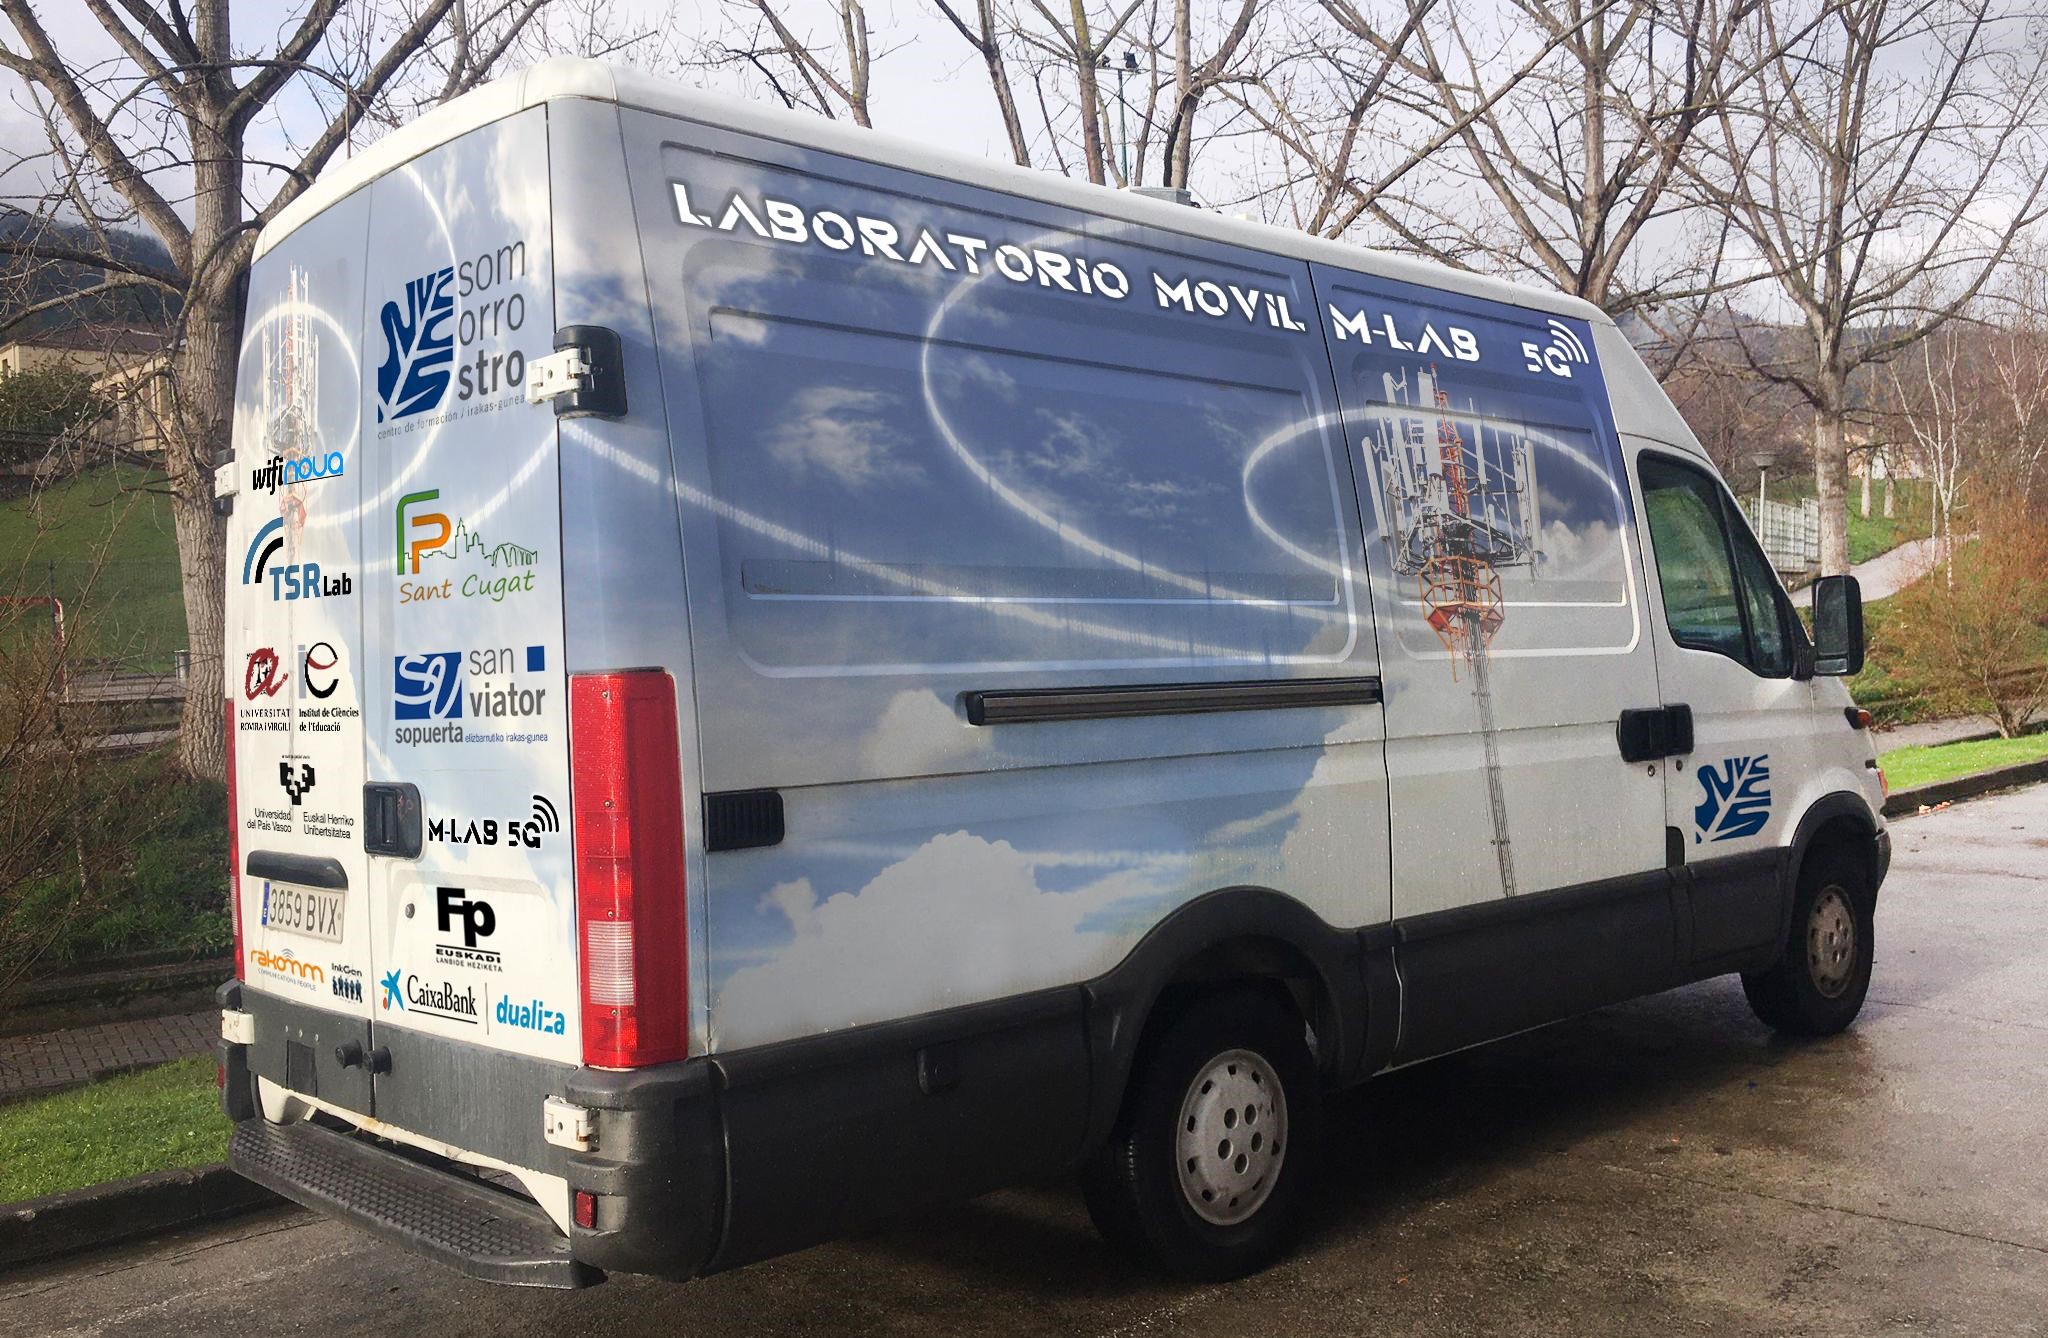 The 5G mobile lab begins to take shape